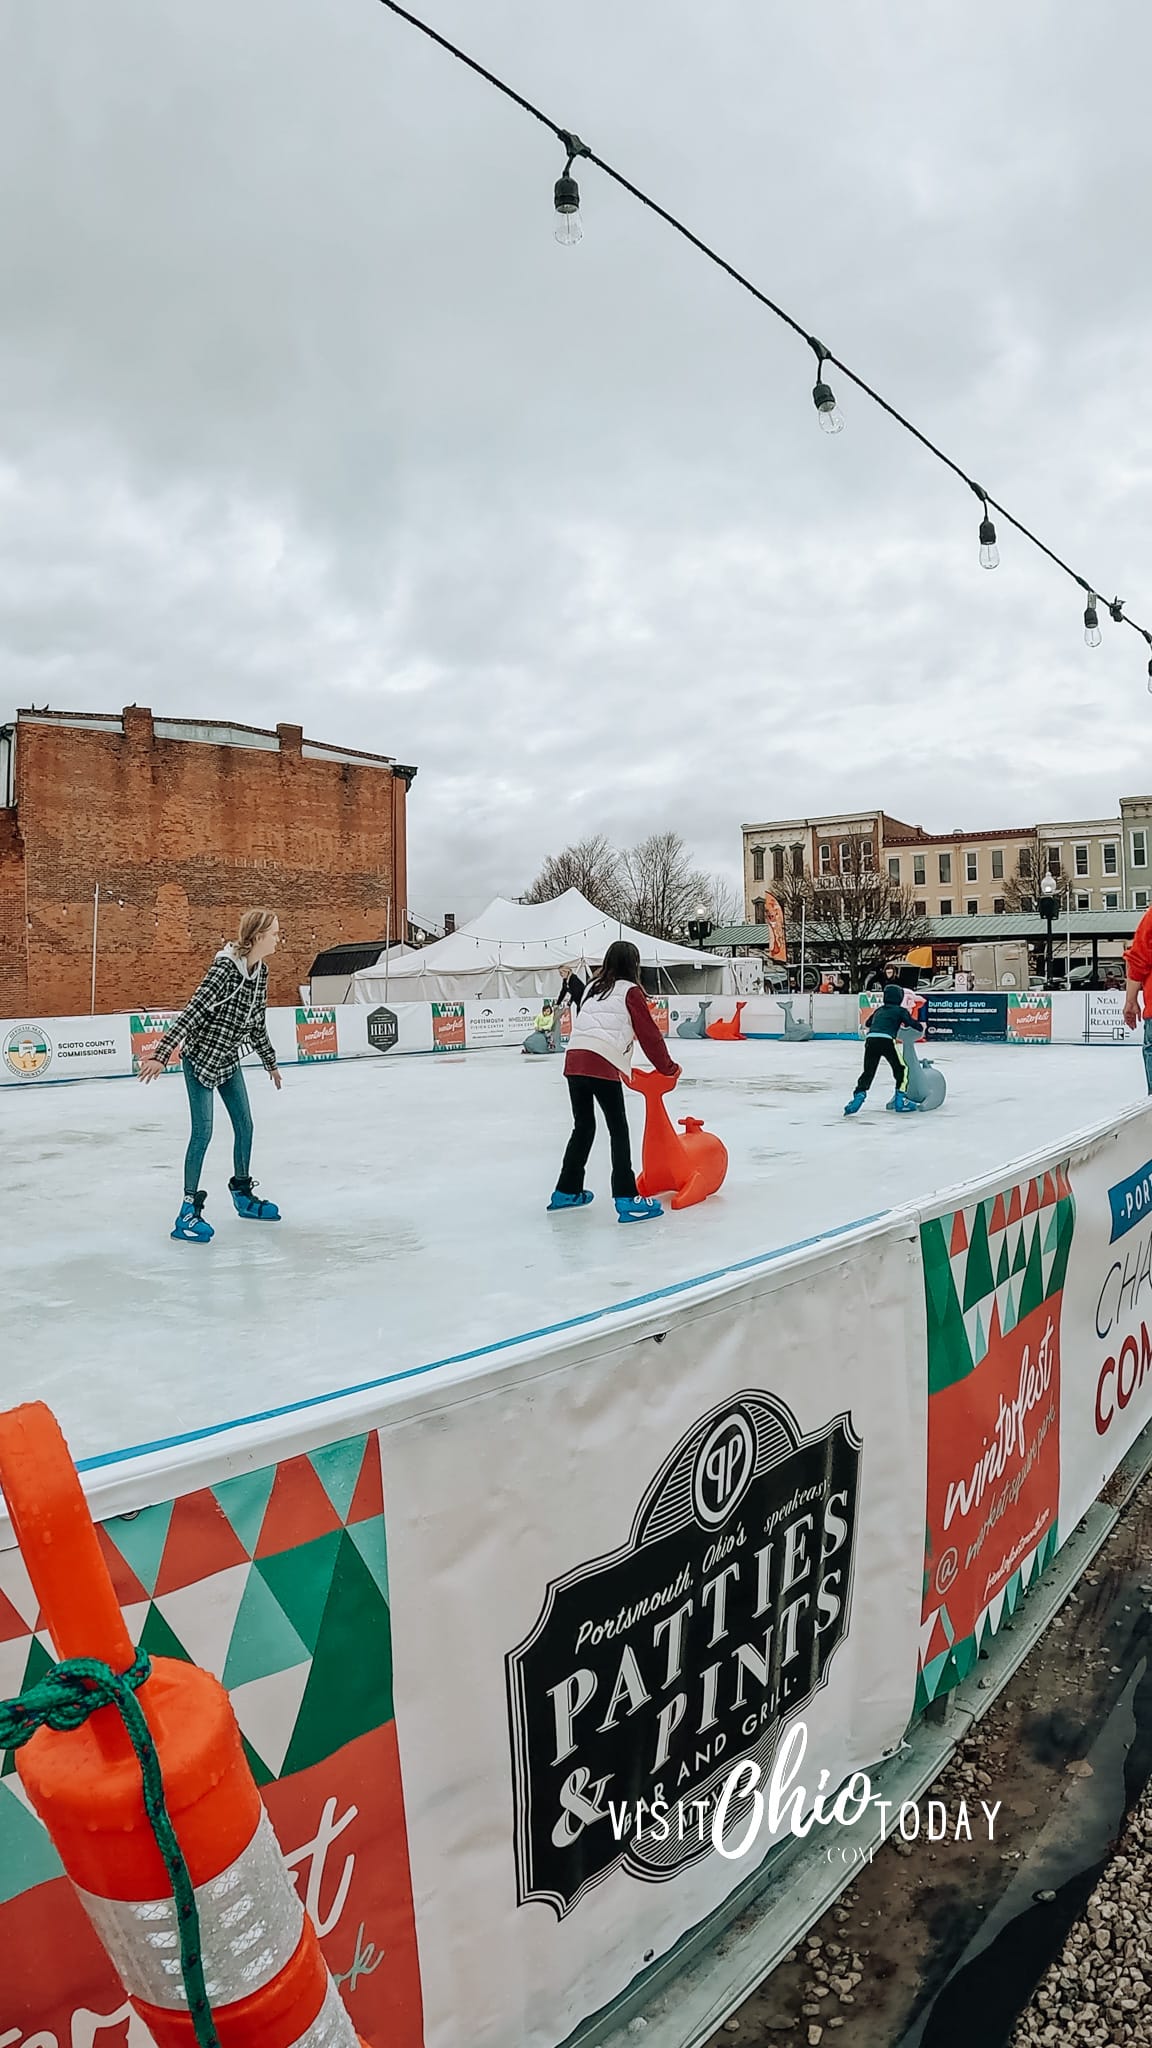 vertical photo of the ice skating rink at Winterfest at Market Square, Portsmouth. Photo credit: Cindy Gordon of VisitOhioToday.com